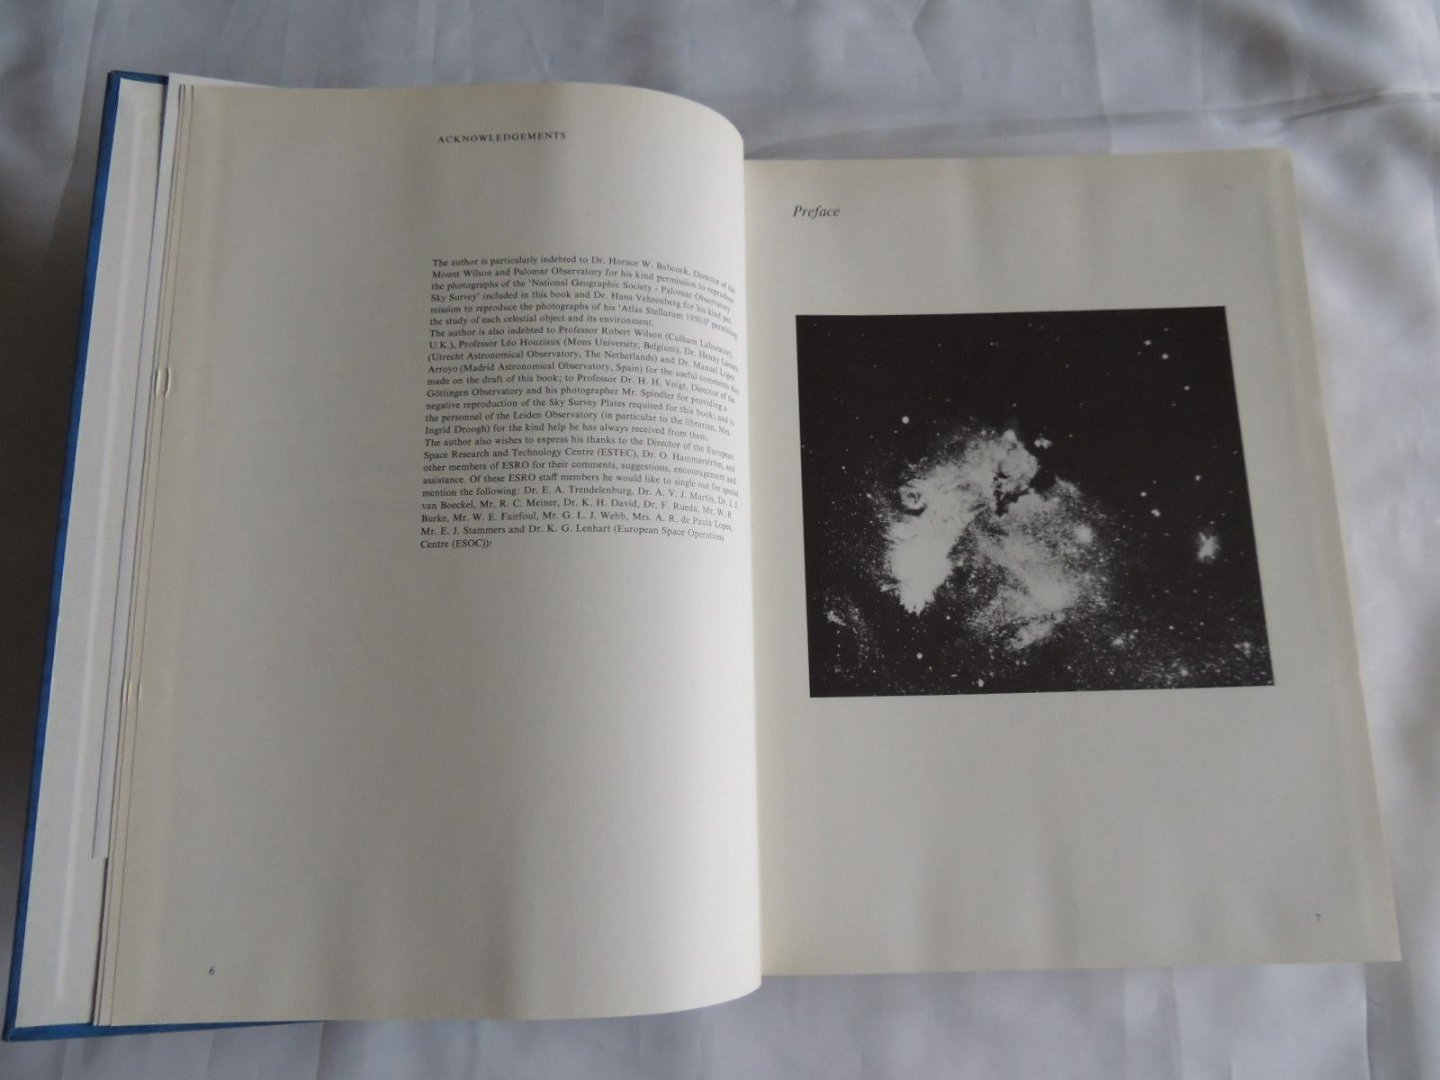 Bastos, Antonio A. - Celestial objects and satellite astronomy. A selection of extended celestial objects, such as star clusters, nebulae and galaxies, of interest for satellite astronomy